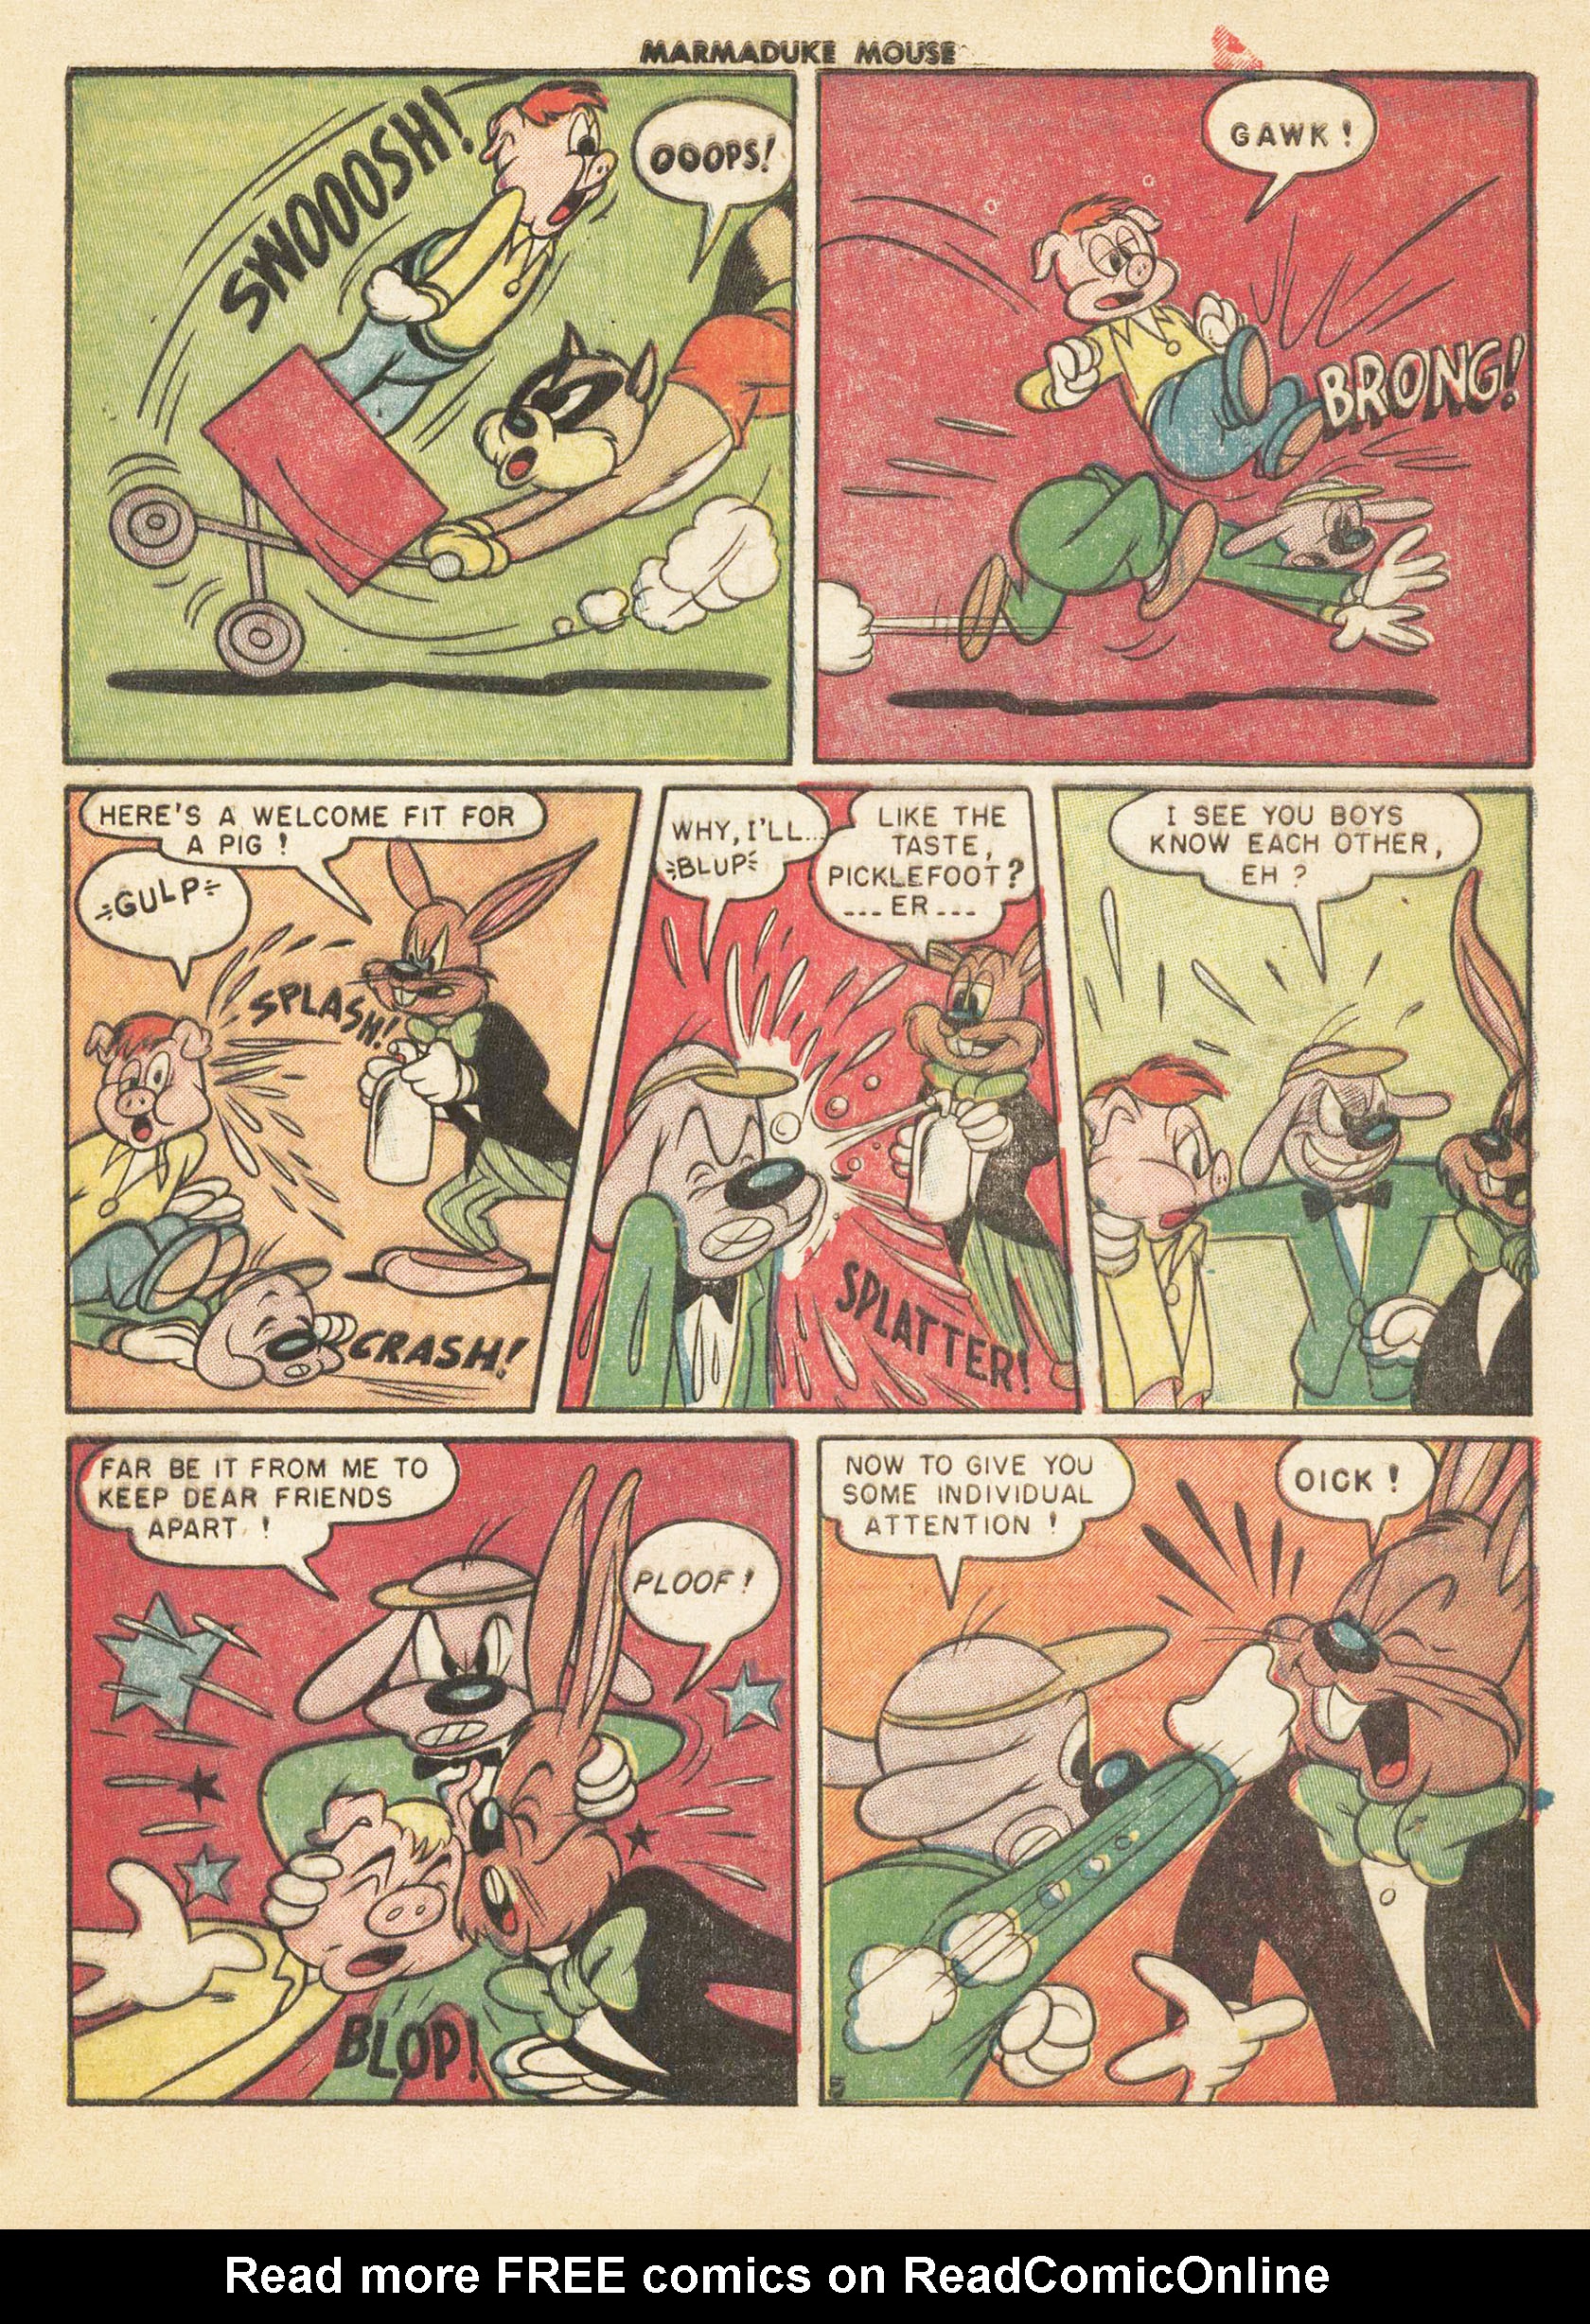 Read online Marmaduke Mouse comic -  Issue #20 - 25